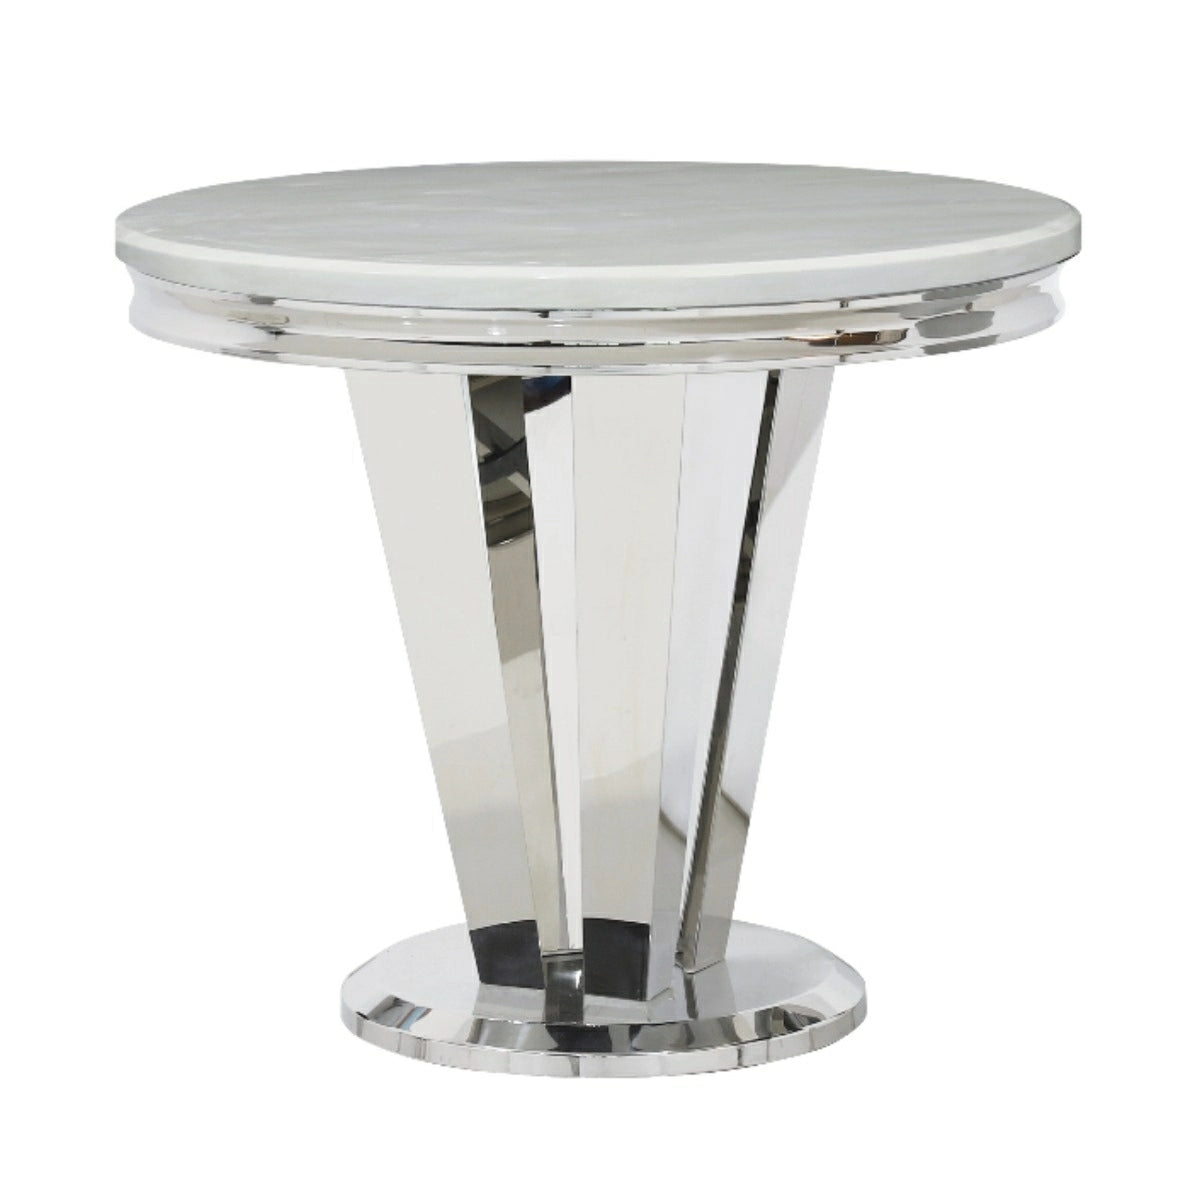 Riccardo 90cm Marble Round Dining Table - 2 Colours Grey/White